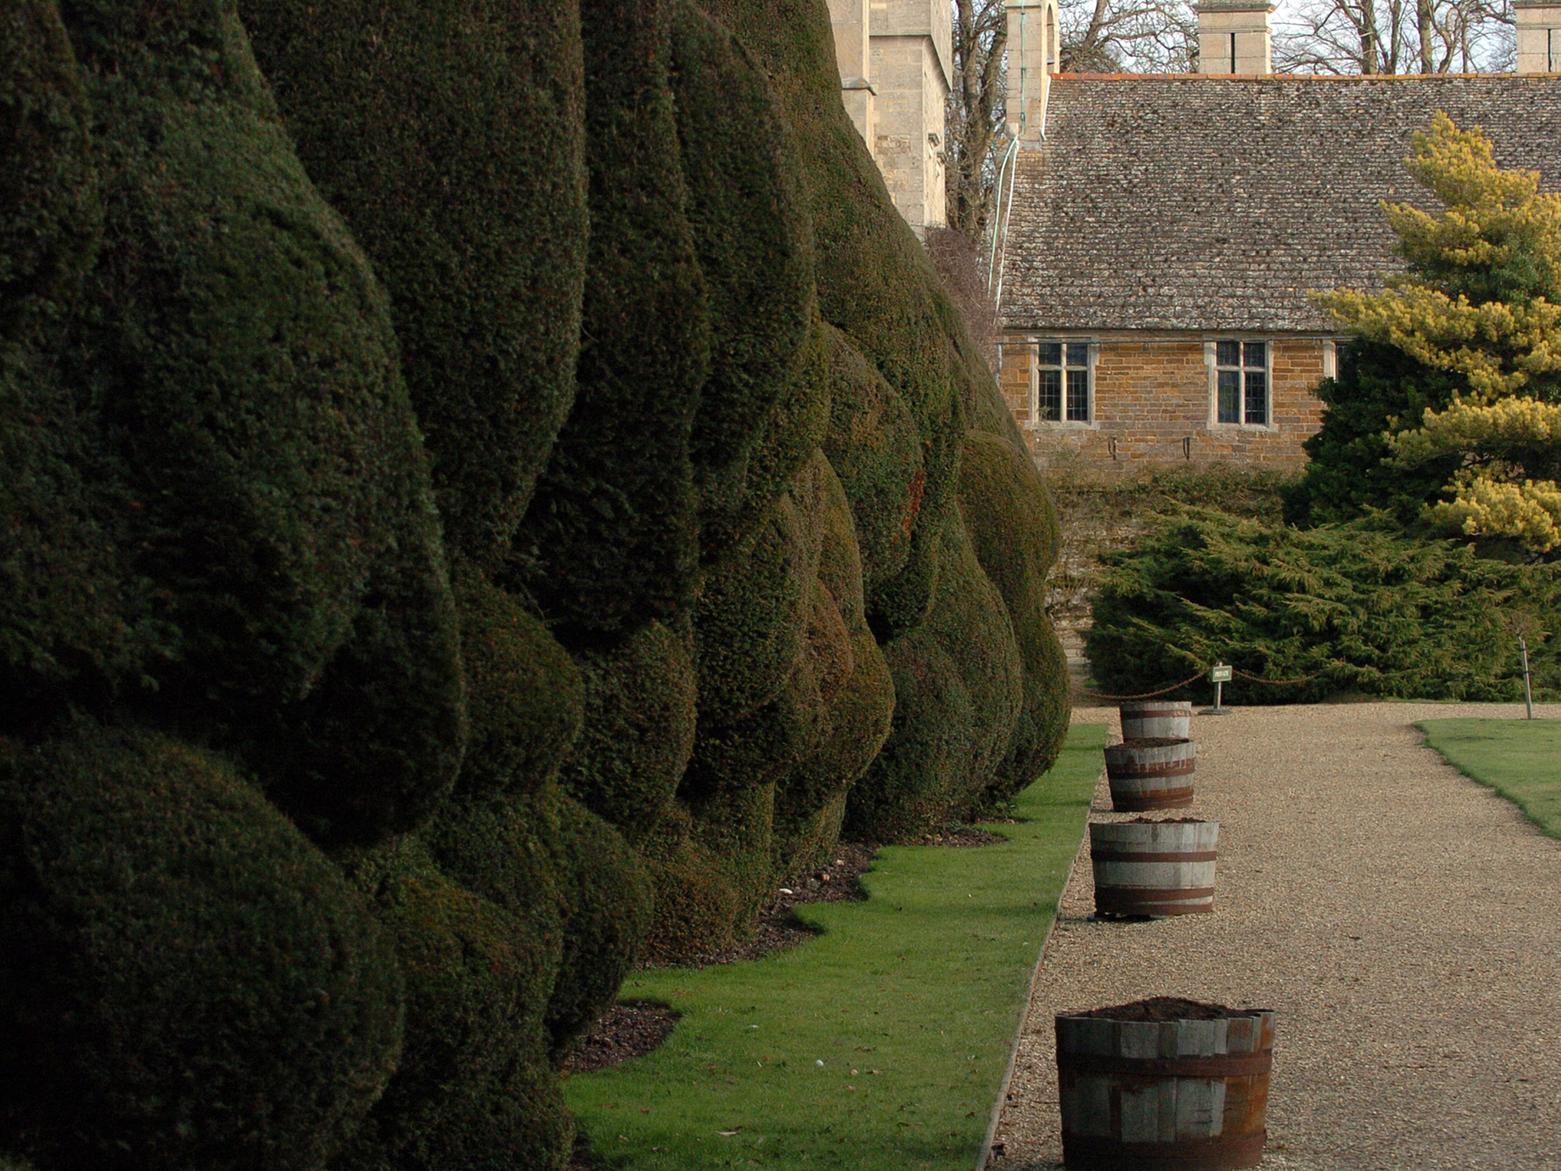 The Yew Hedge at Rockingham Castle